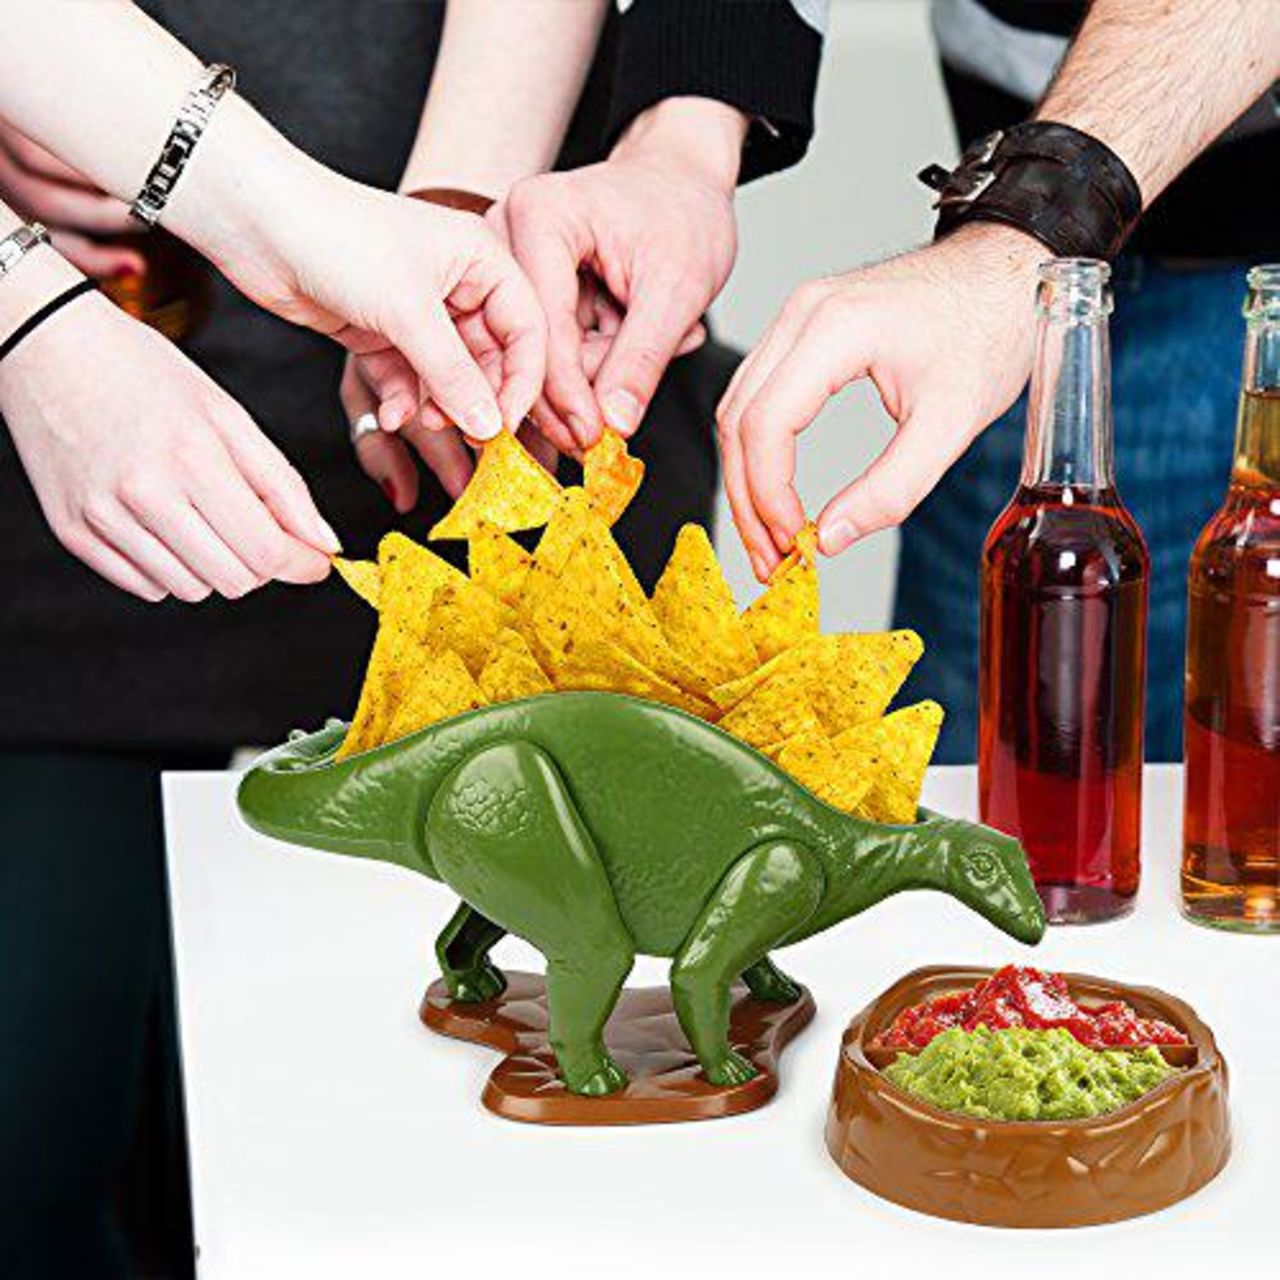 34 Weird Kitchen Products That are Oh-So-Useful